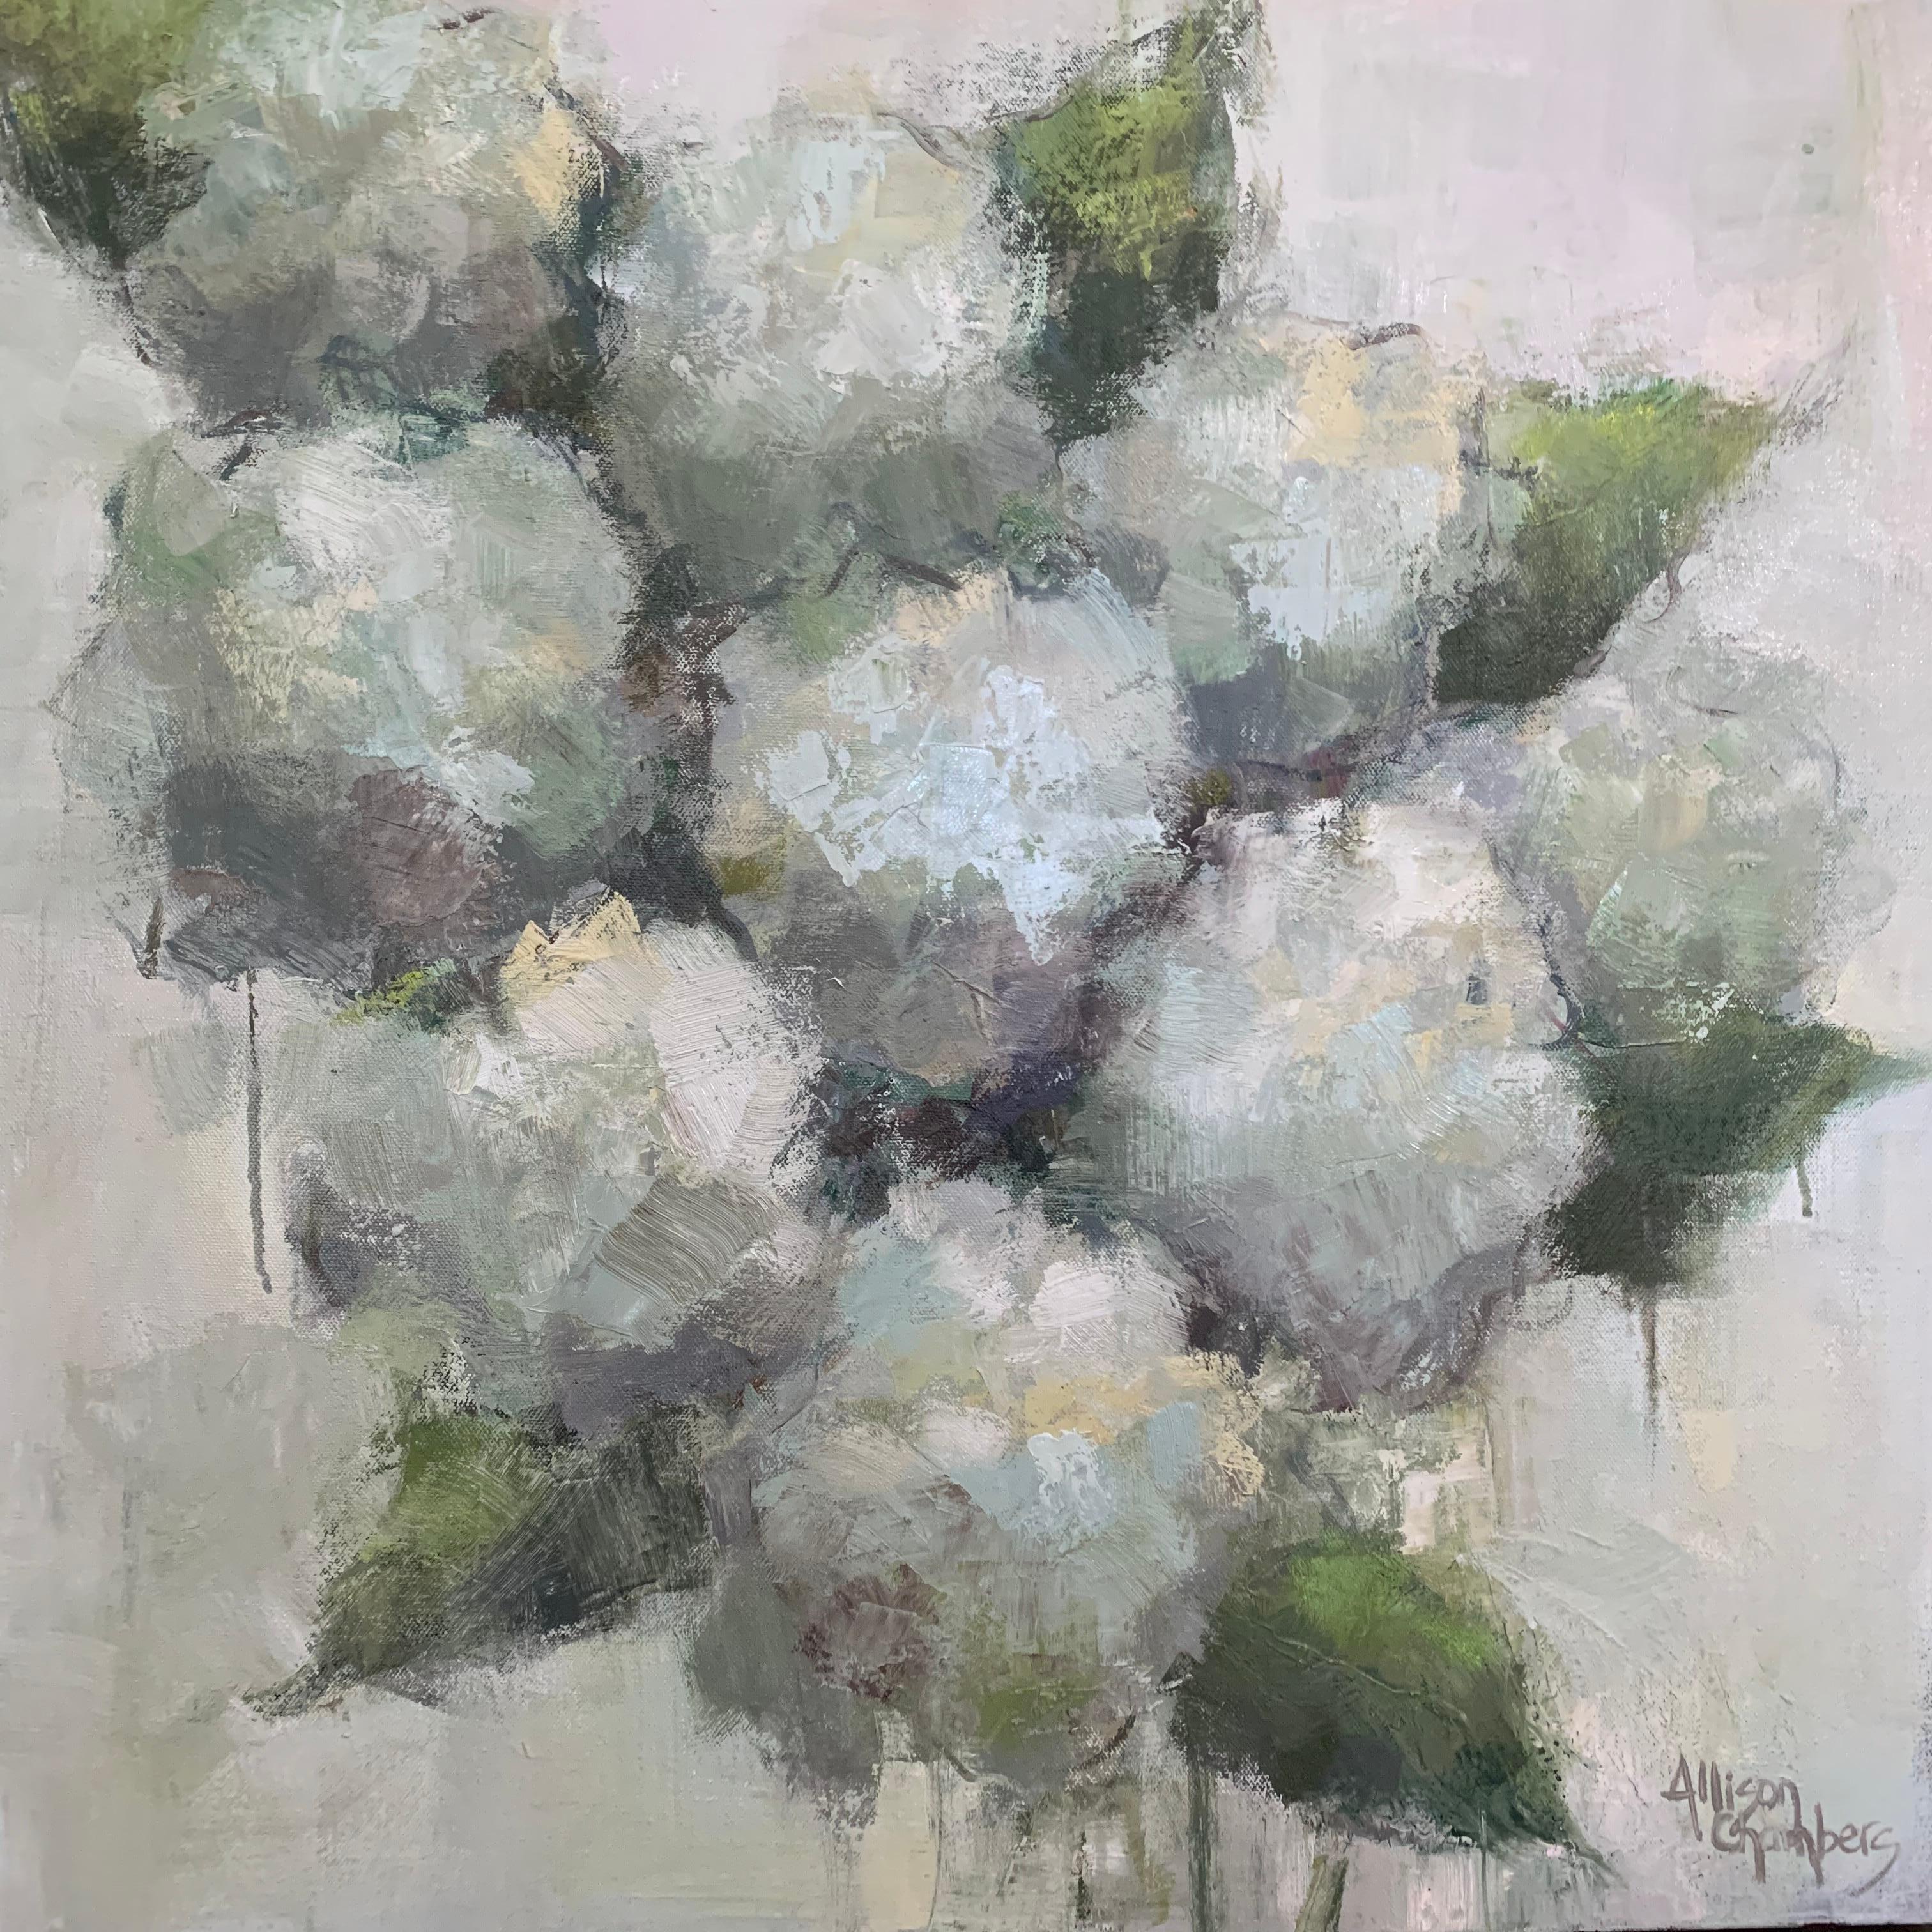 "Whisper 2' is a framed oil on canvas Impressionist floral painting of square format created by American artist Allison Chambers in 2022. Featuring a palette made of white, green, grey and purple tones, the painting depicts an exquisite bouquet of